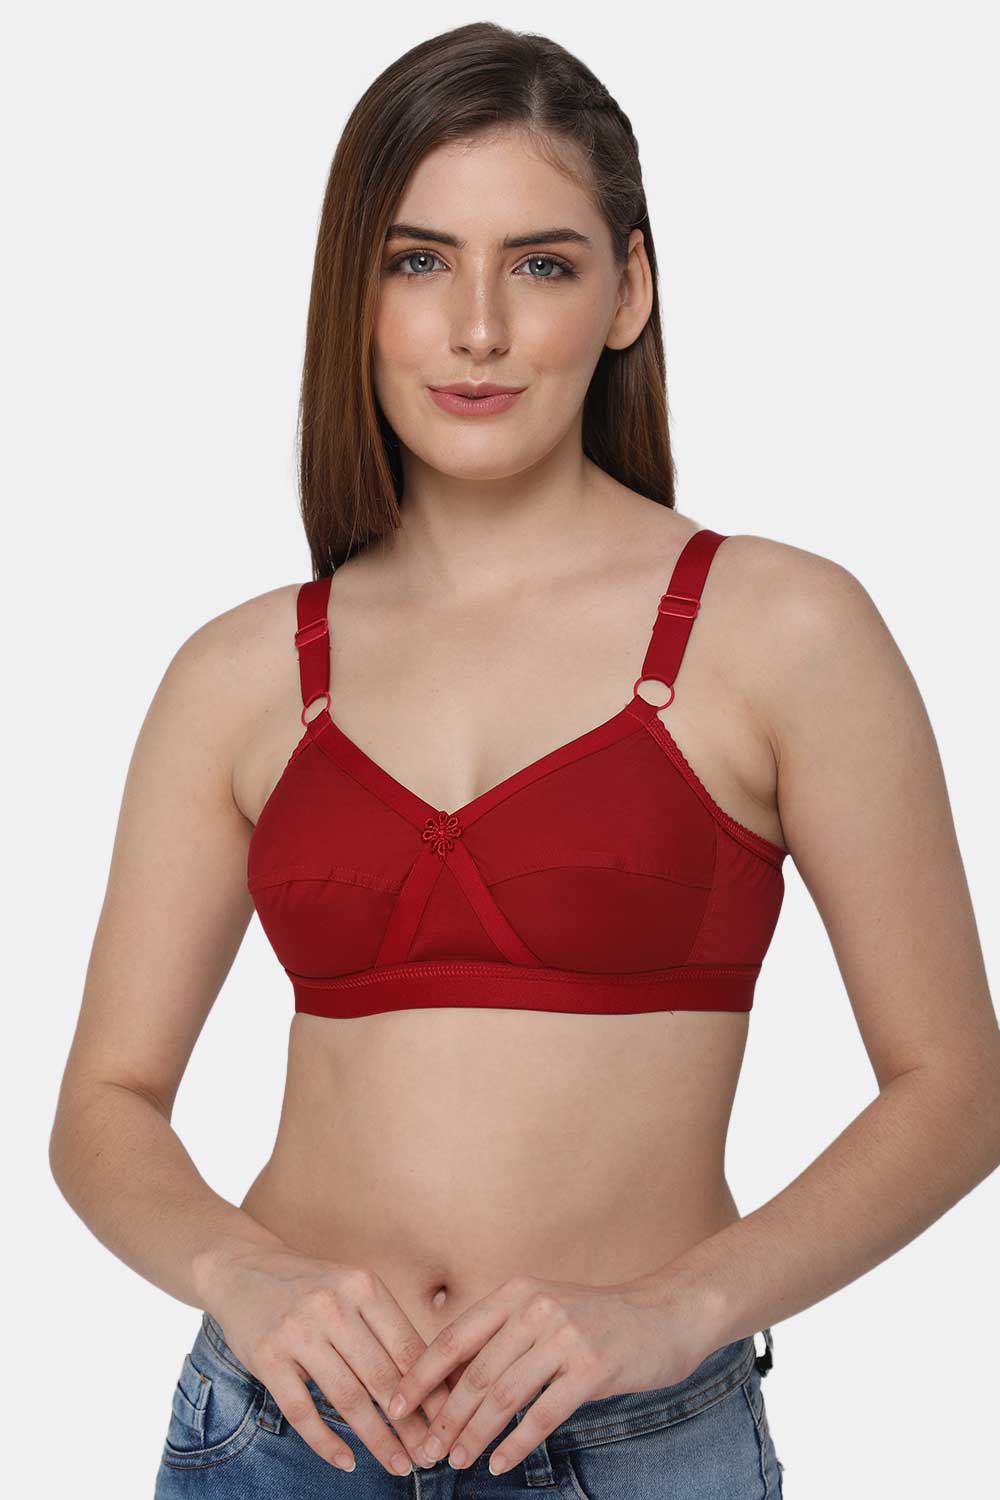 Trylo - Buy Trylo Bra & Panty Online at Best Prices (Page 4)